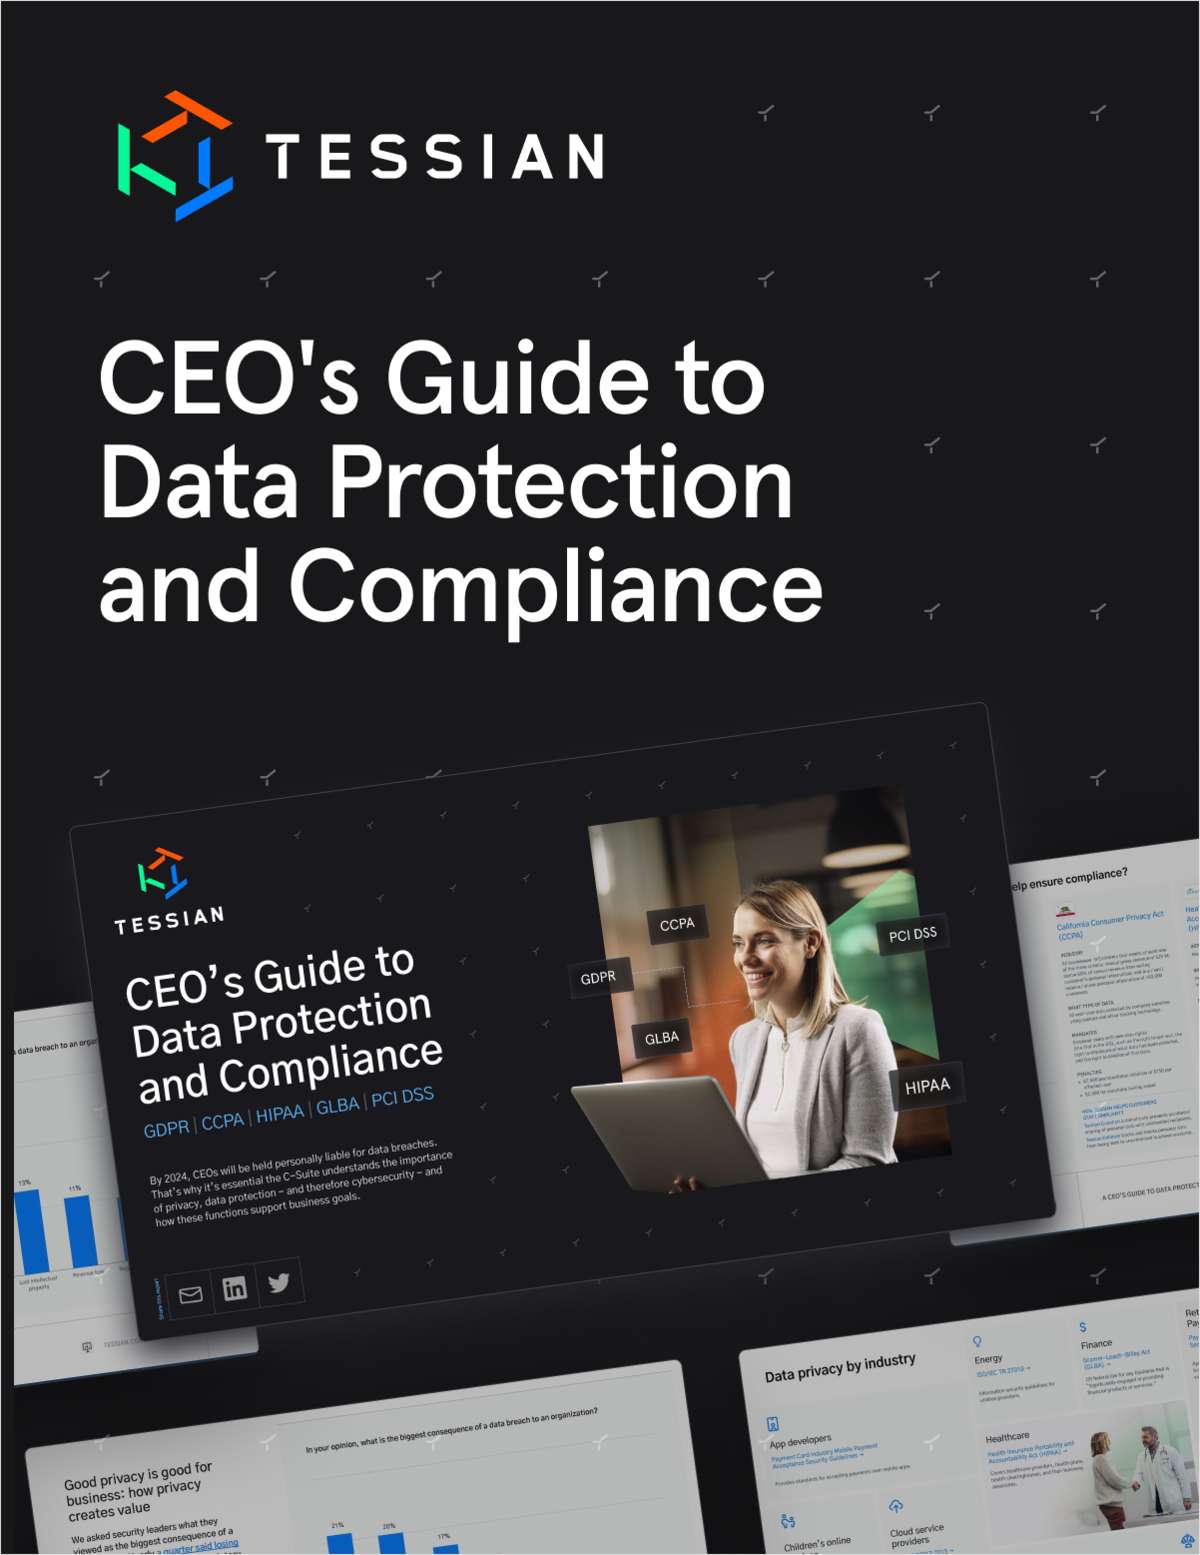 The CEO's Guide to Data Protection and Compliance